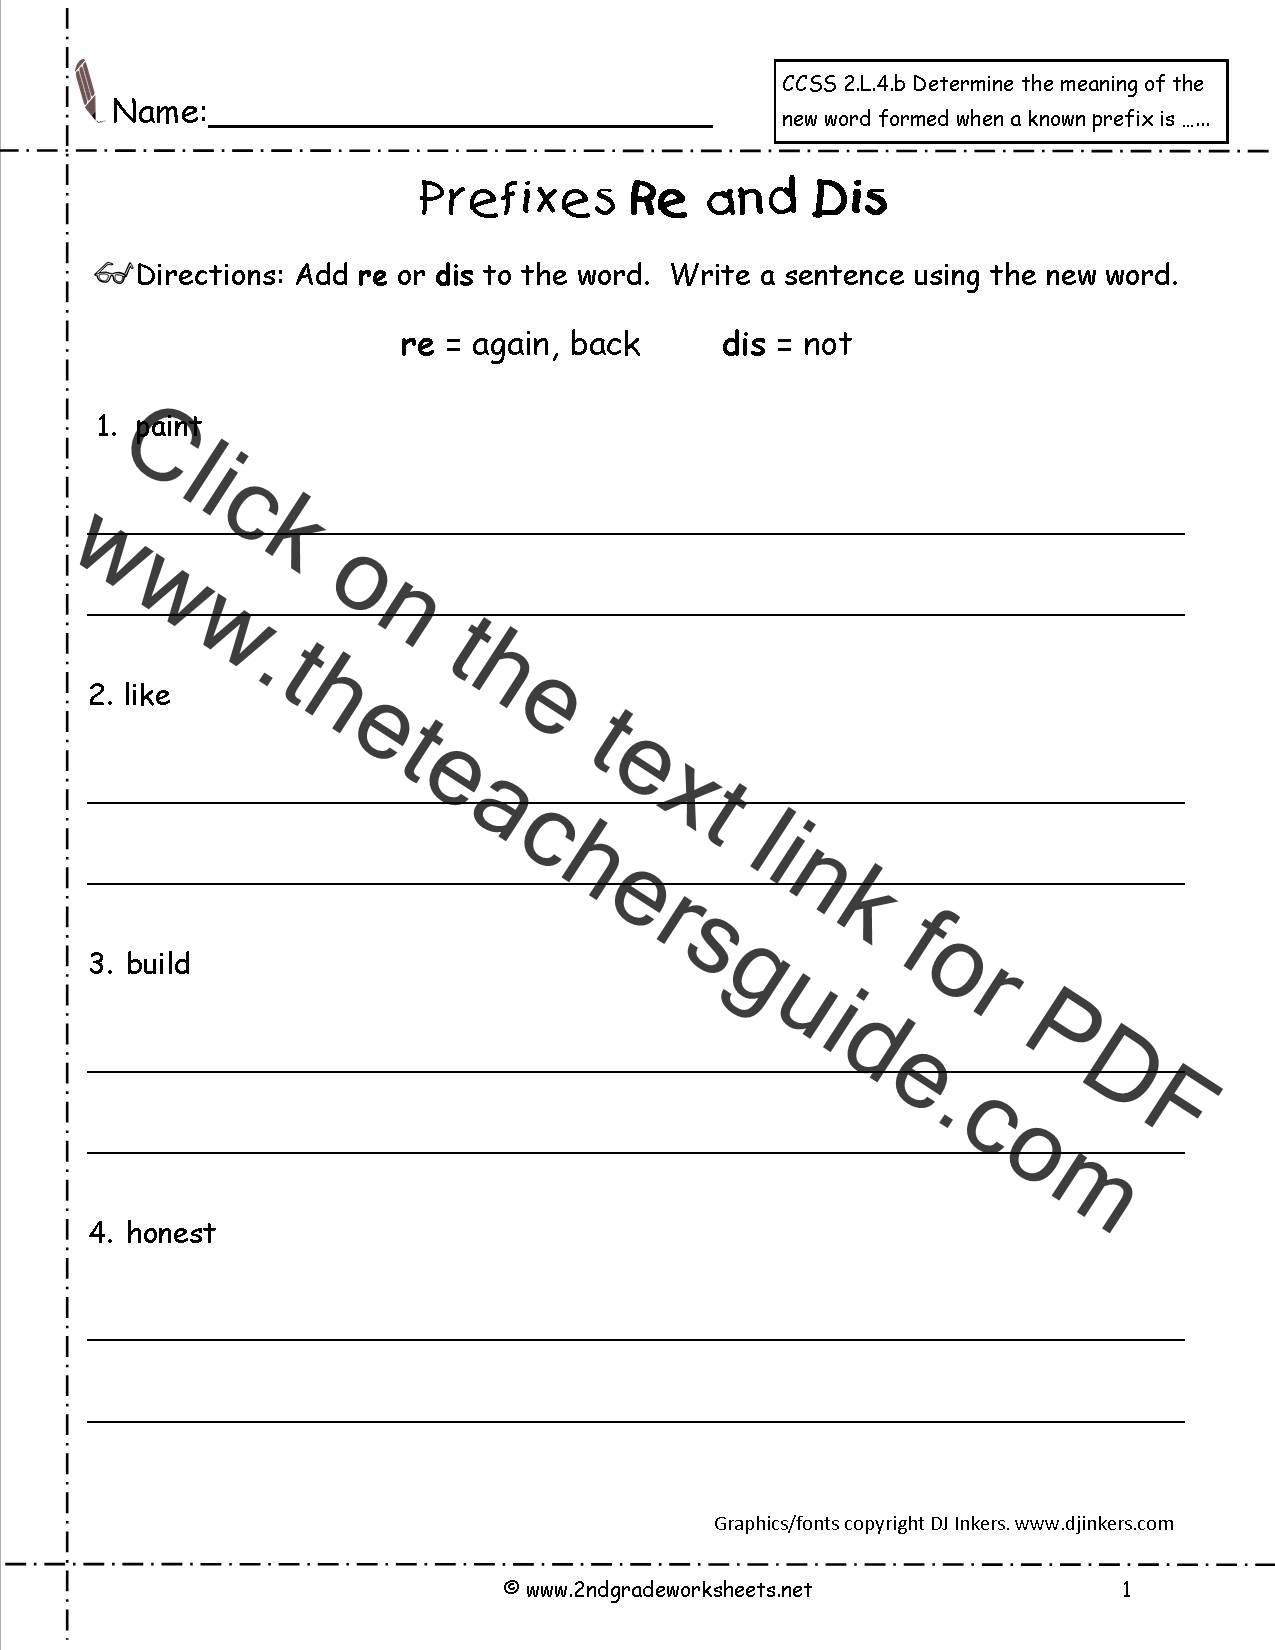 Free Prefixes And Suffixes Worksheets From The Teacher s Guide